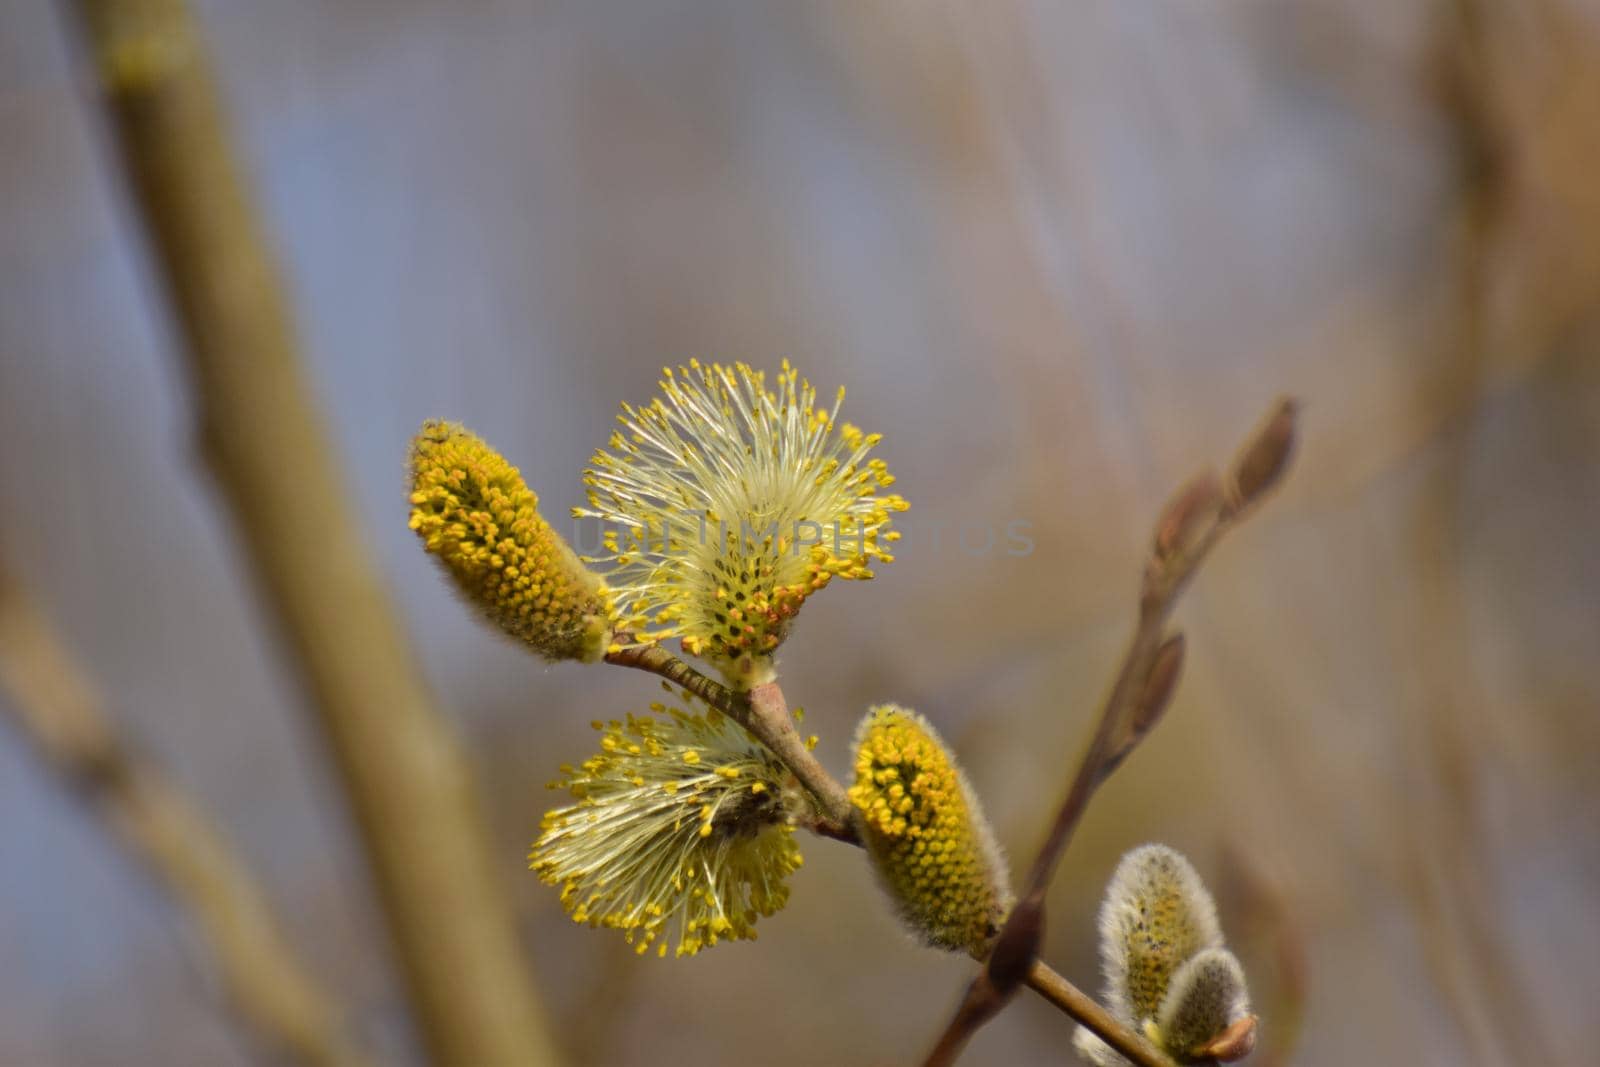 Flowering salix salicaceae against a blurred background by Luise123